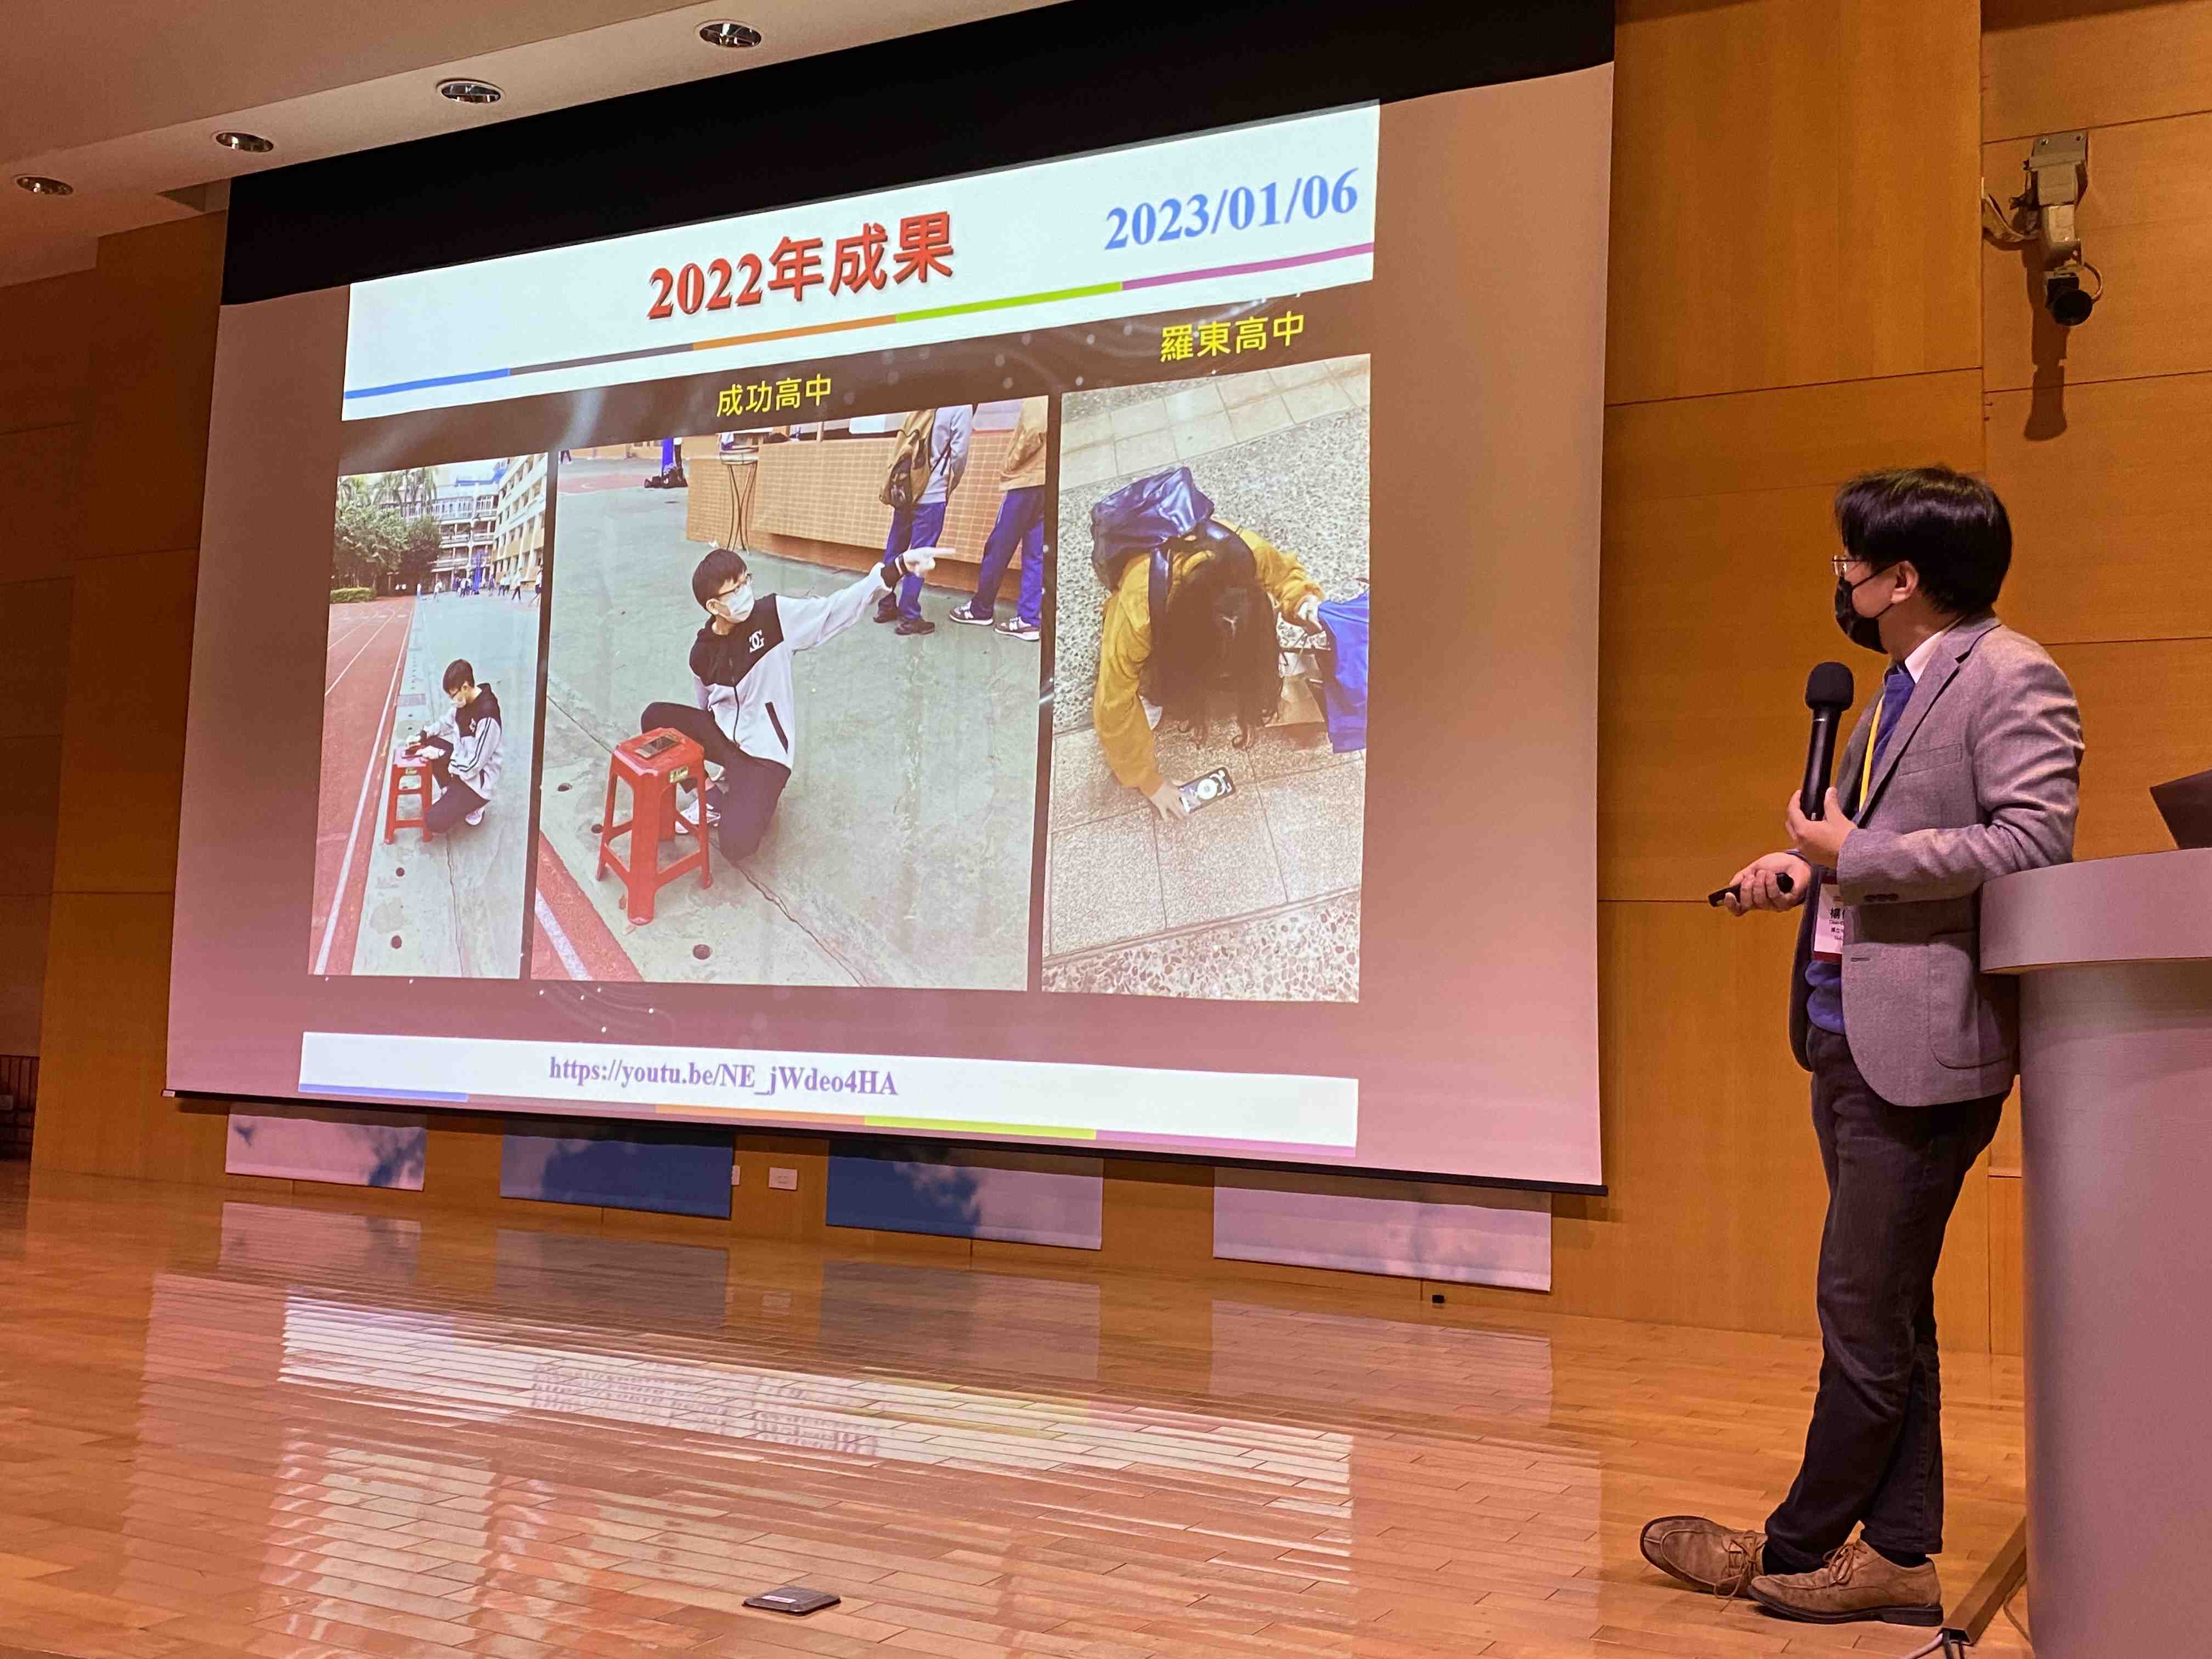 Oral Presentation on the IYBSSD Geomagnetic Measurement Activity at the 2023 Taiwan Physical Society Annual Meeting.